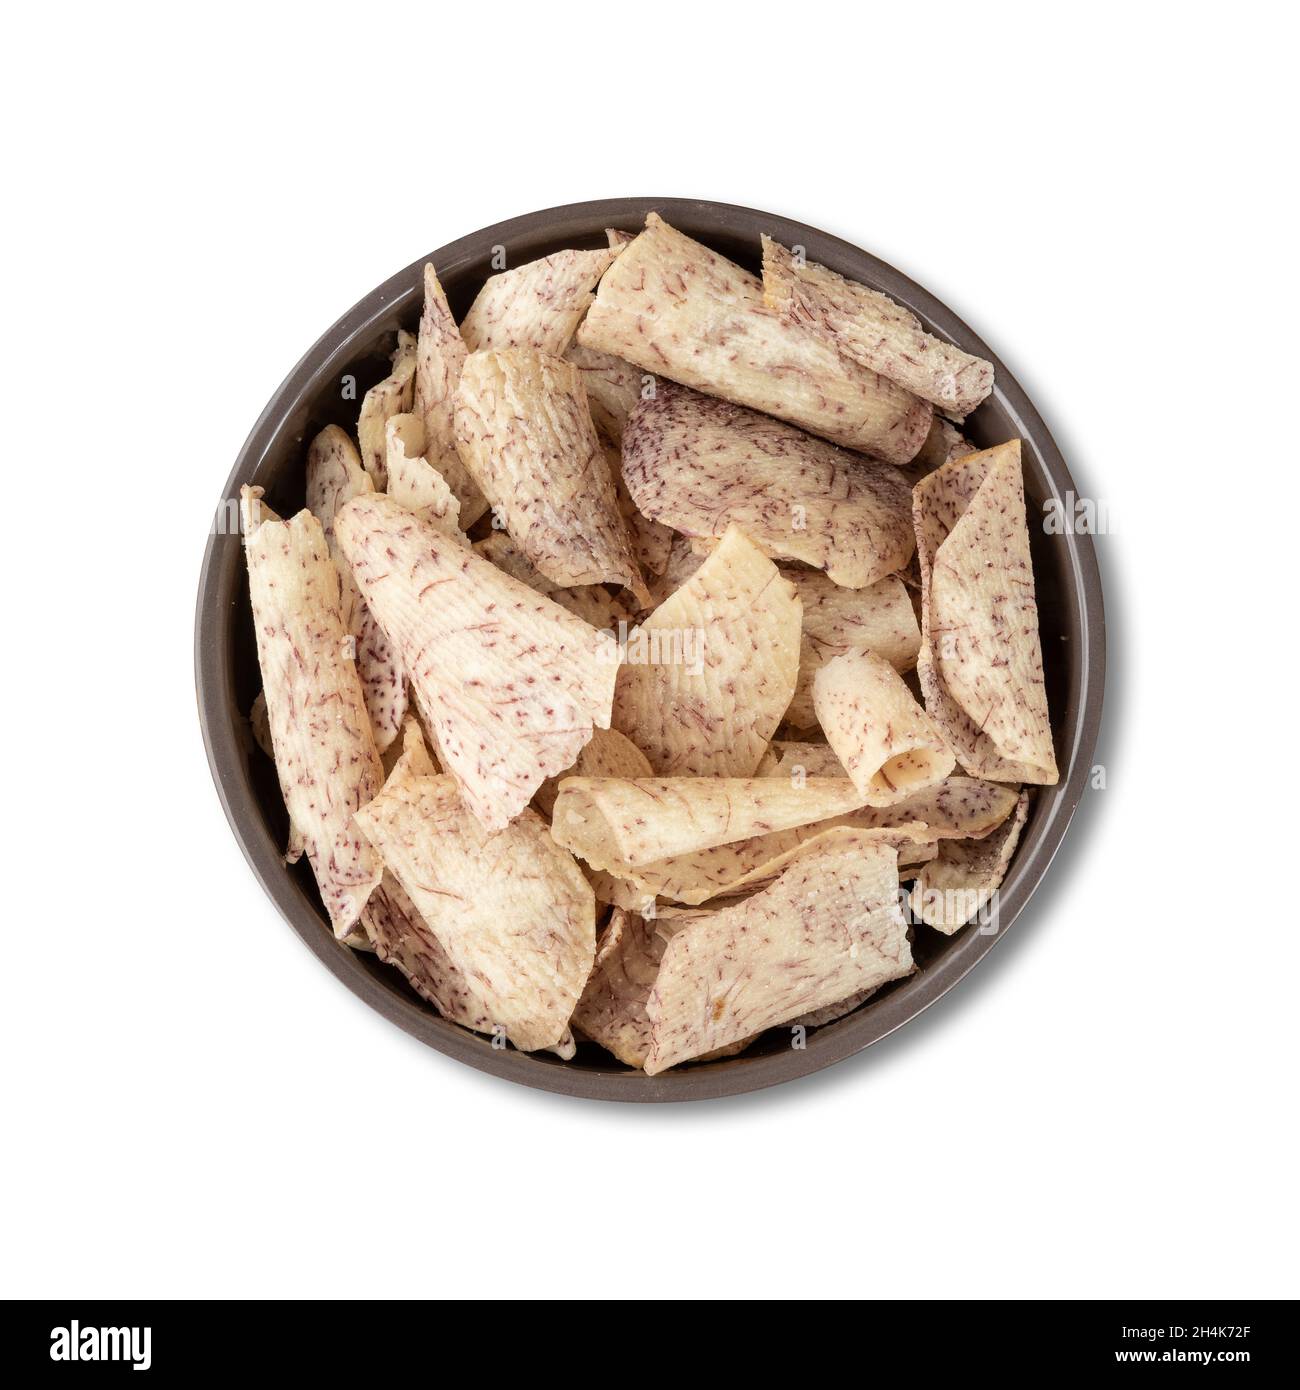 Yam or taro chips in a bowl isolated over white background. Stock Photo